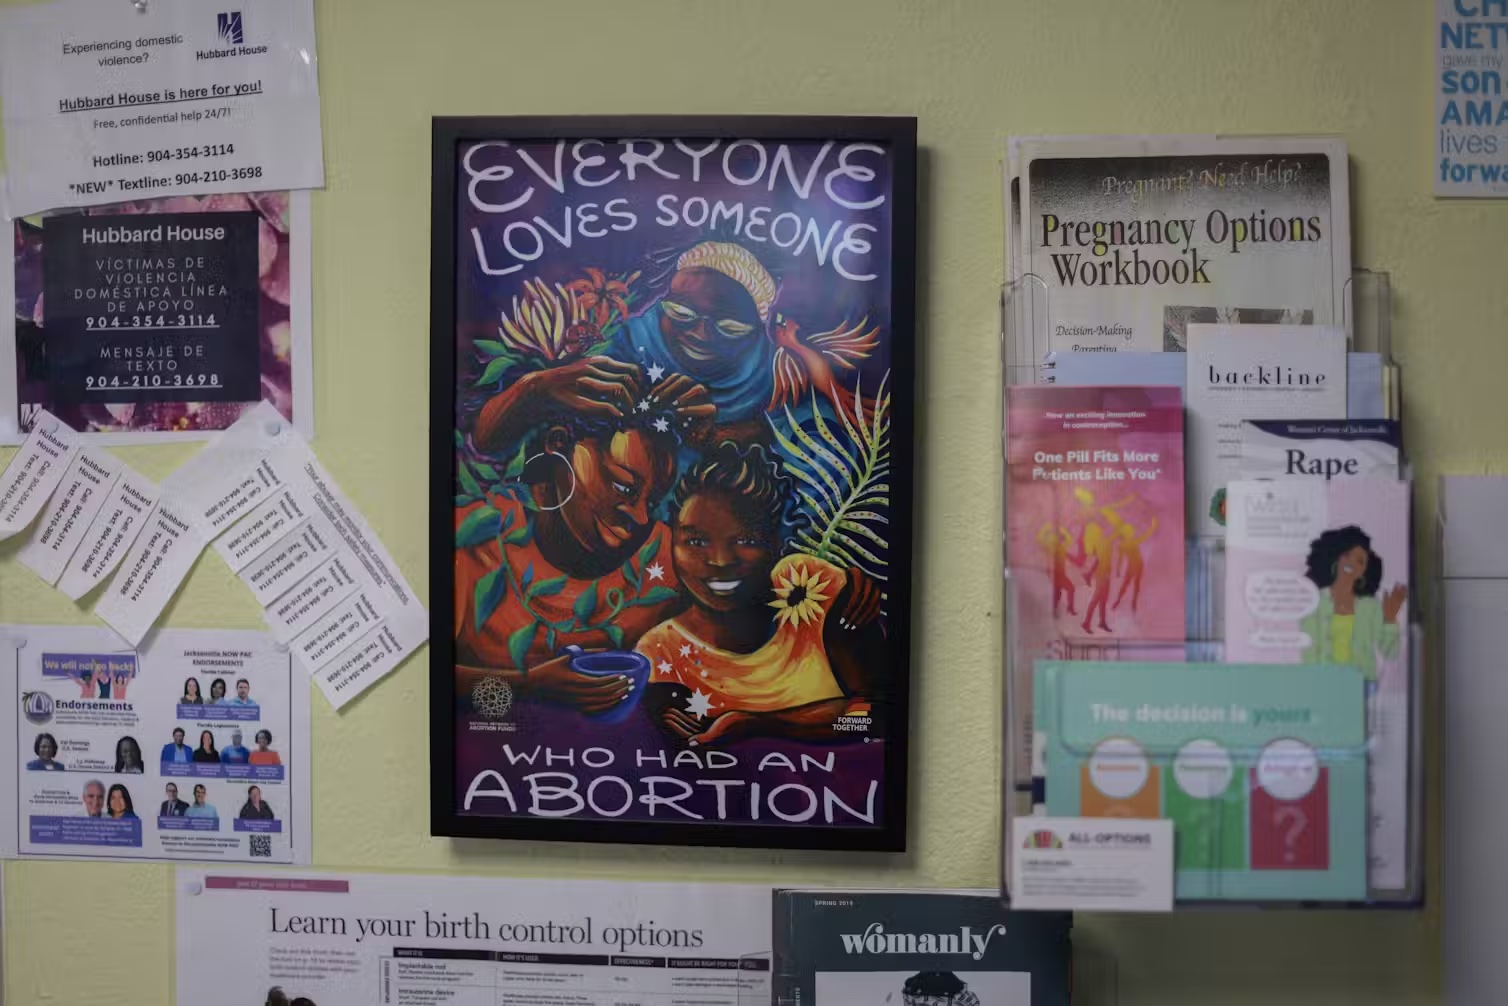 Poster on wall readers abortion and deals with pregnancy dates